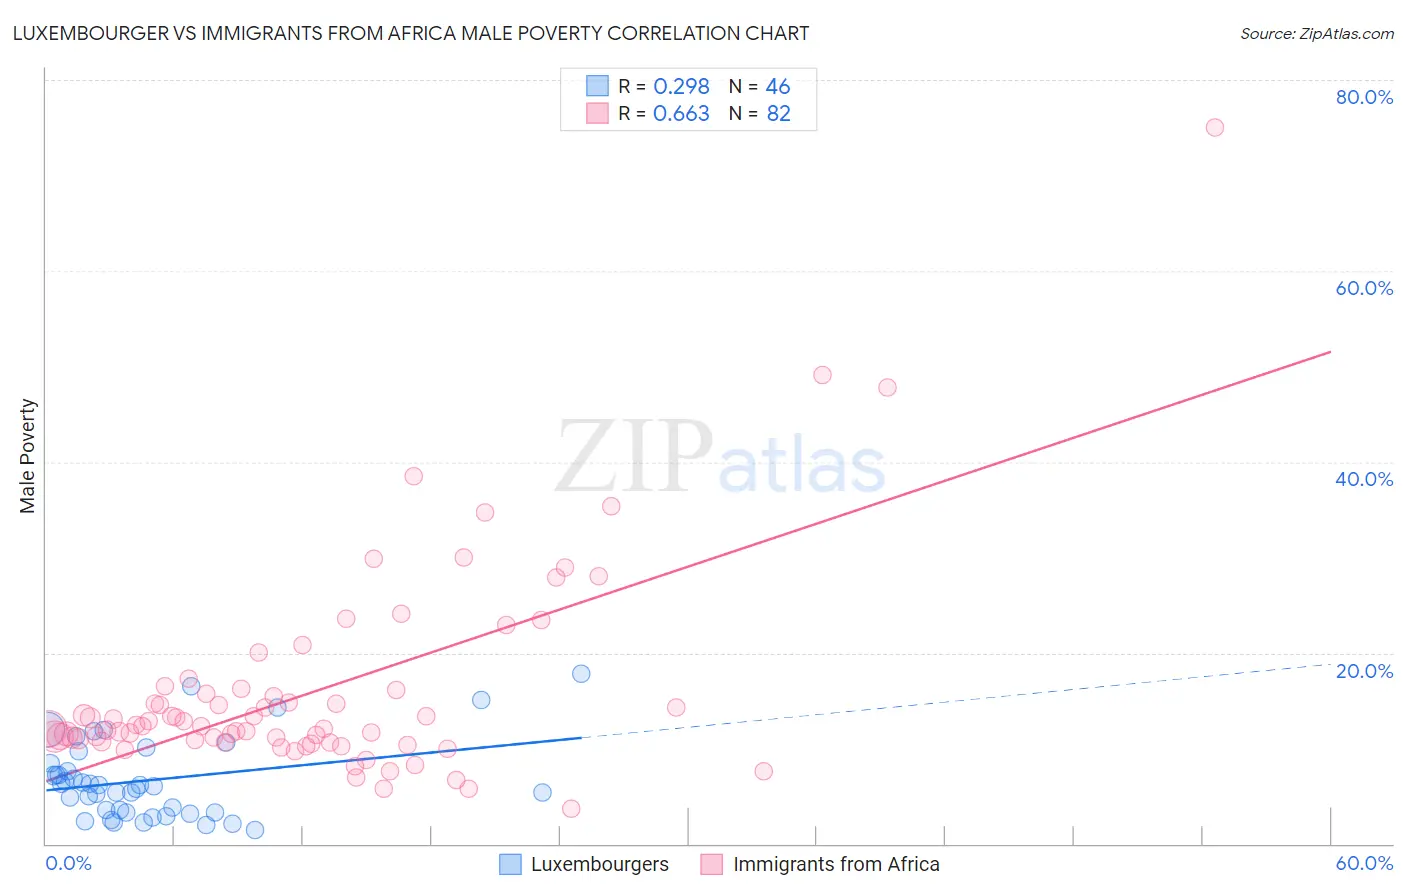 Luxembourger vs Immigrants from Africa Male Poverty